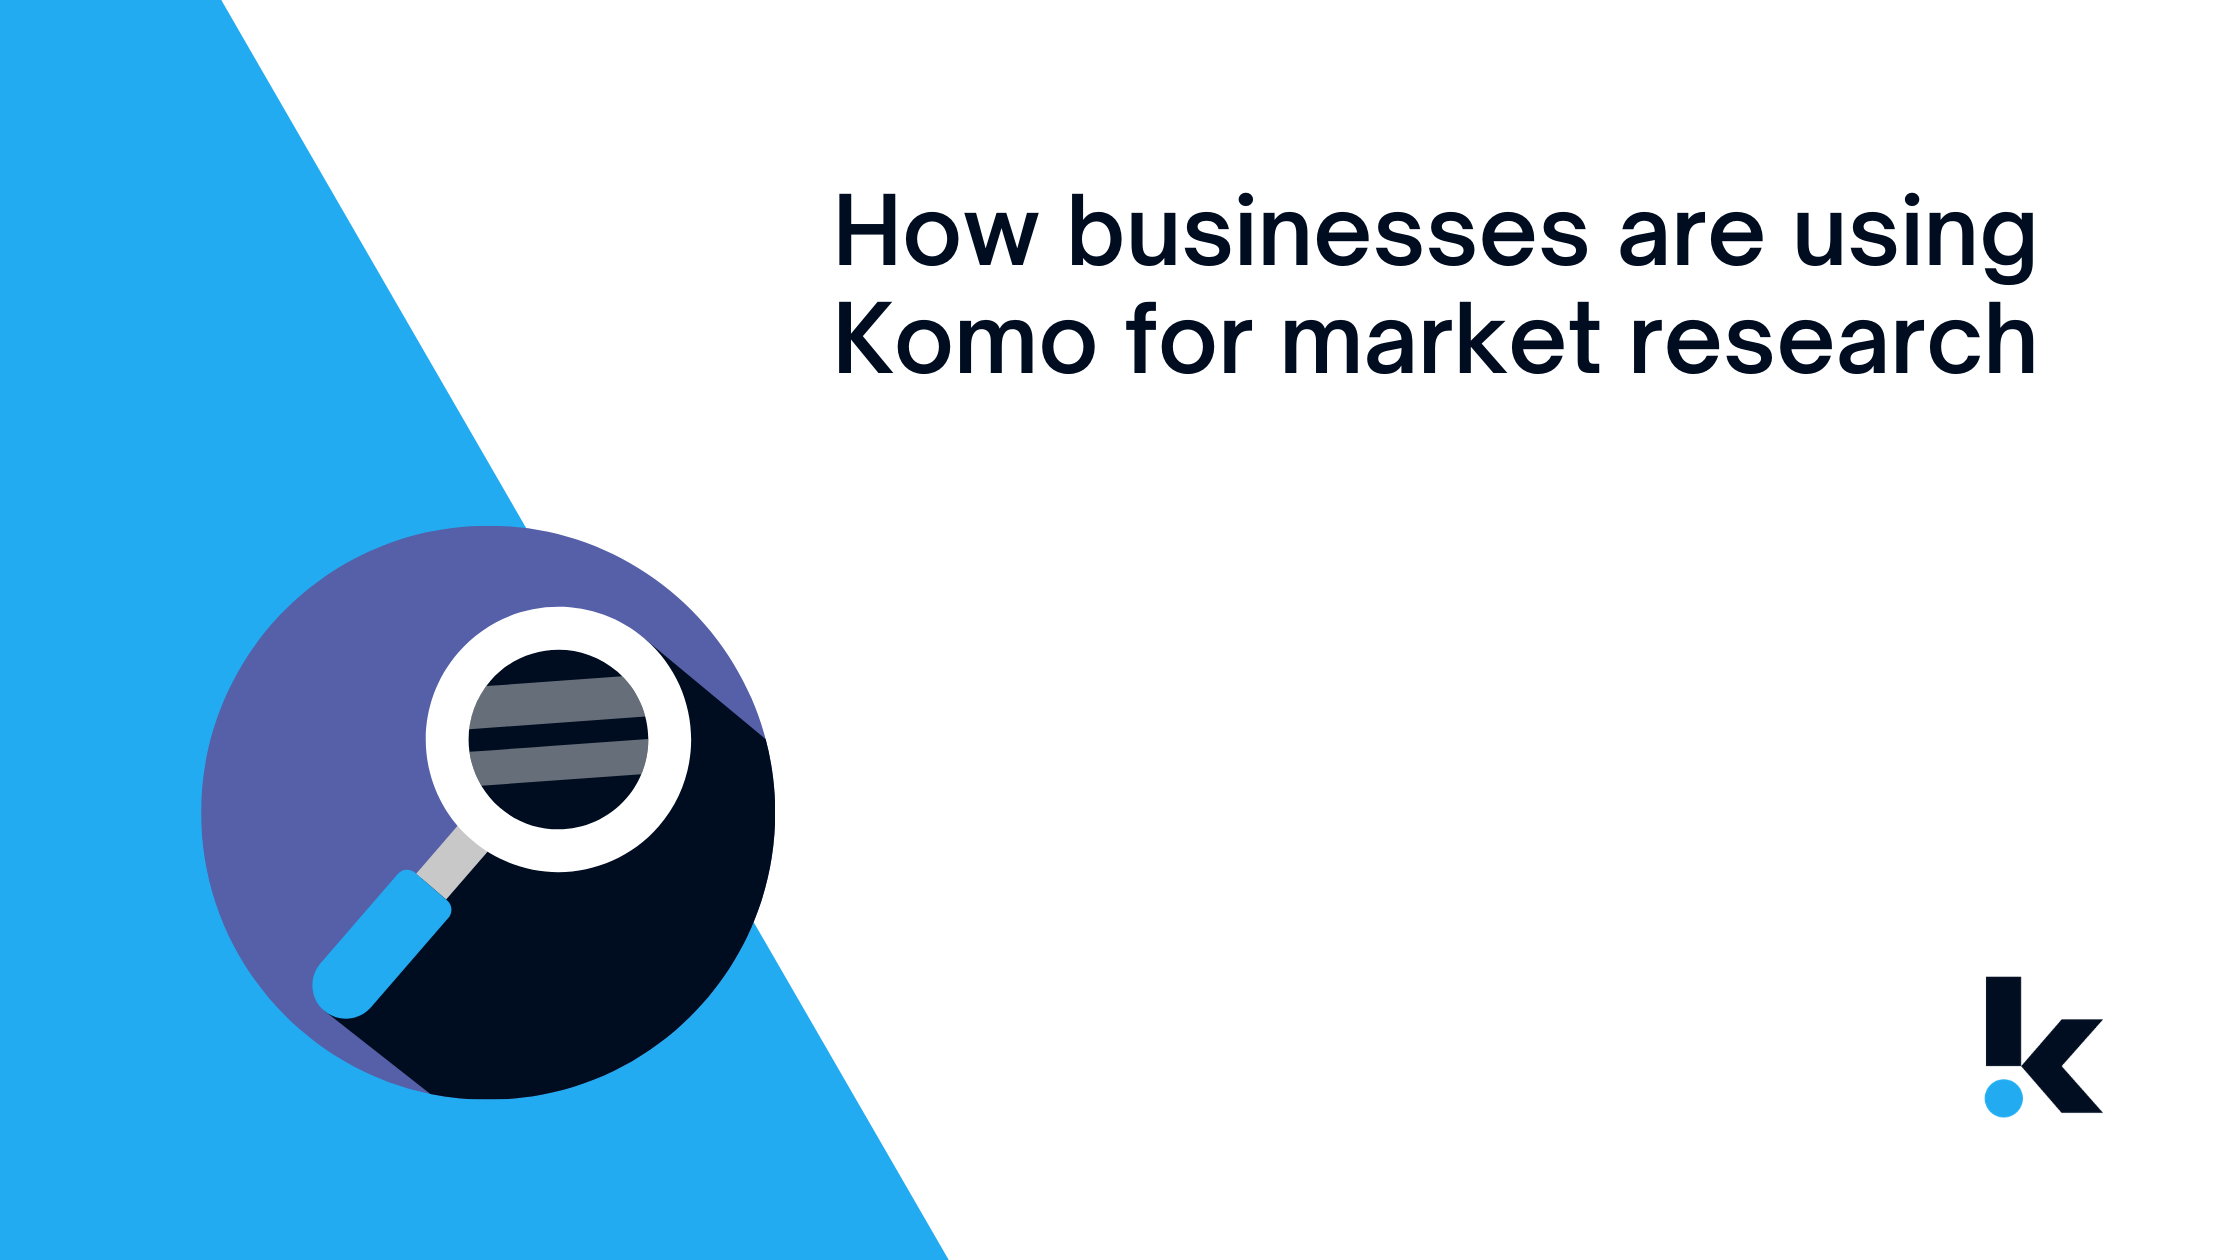 Learn how Komo uses gamification tactics to achieve industry leading market research response rates.